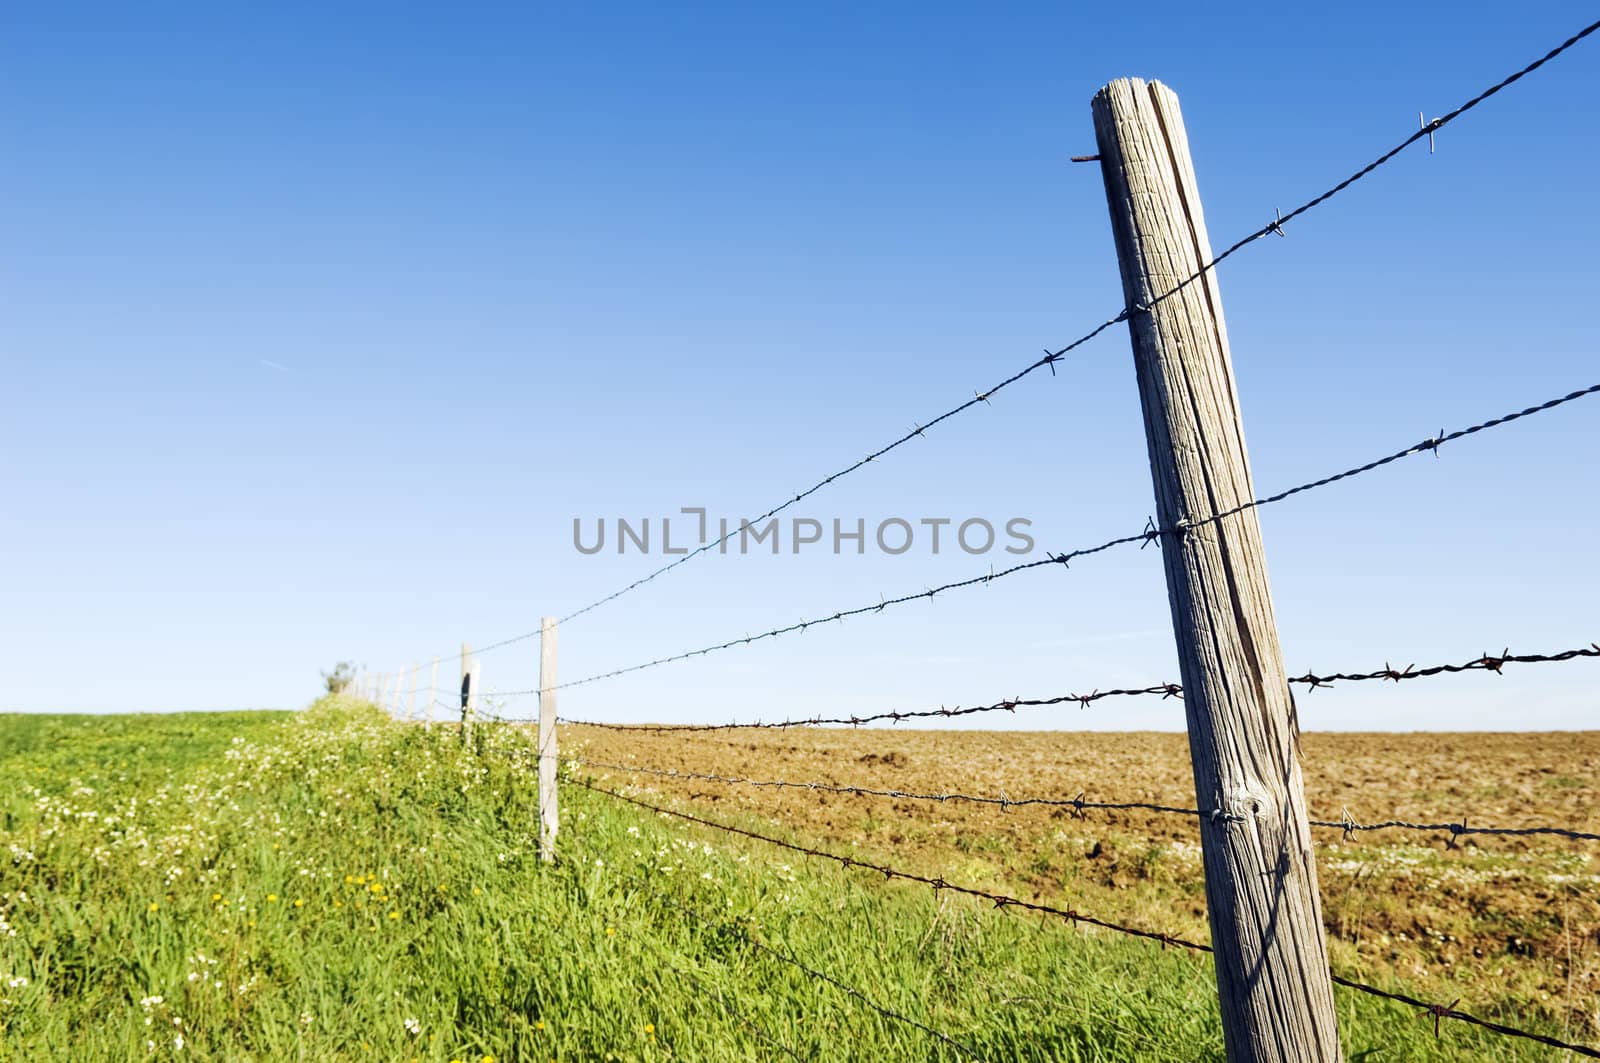 Perspective of a barbwire fence separating two farmlands